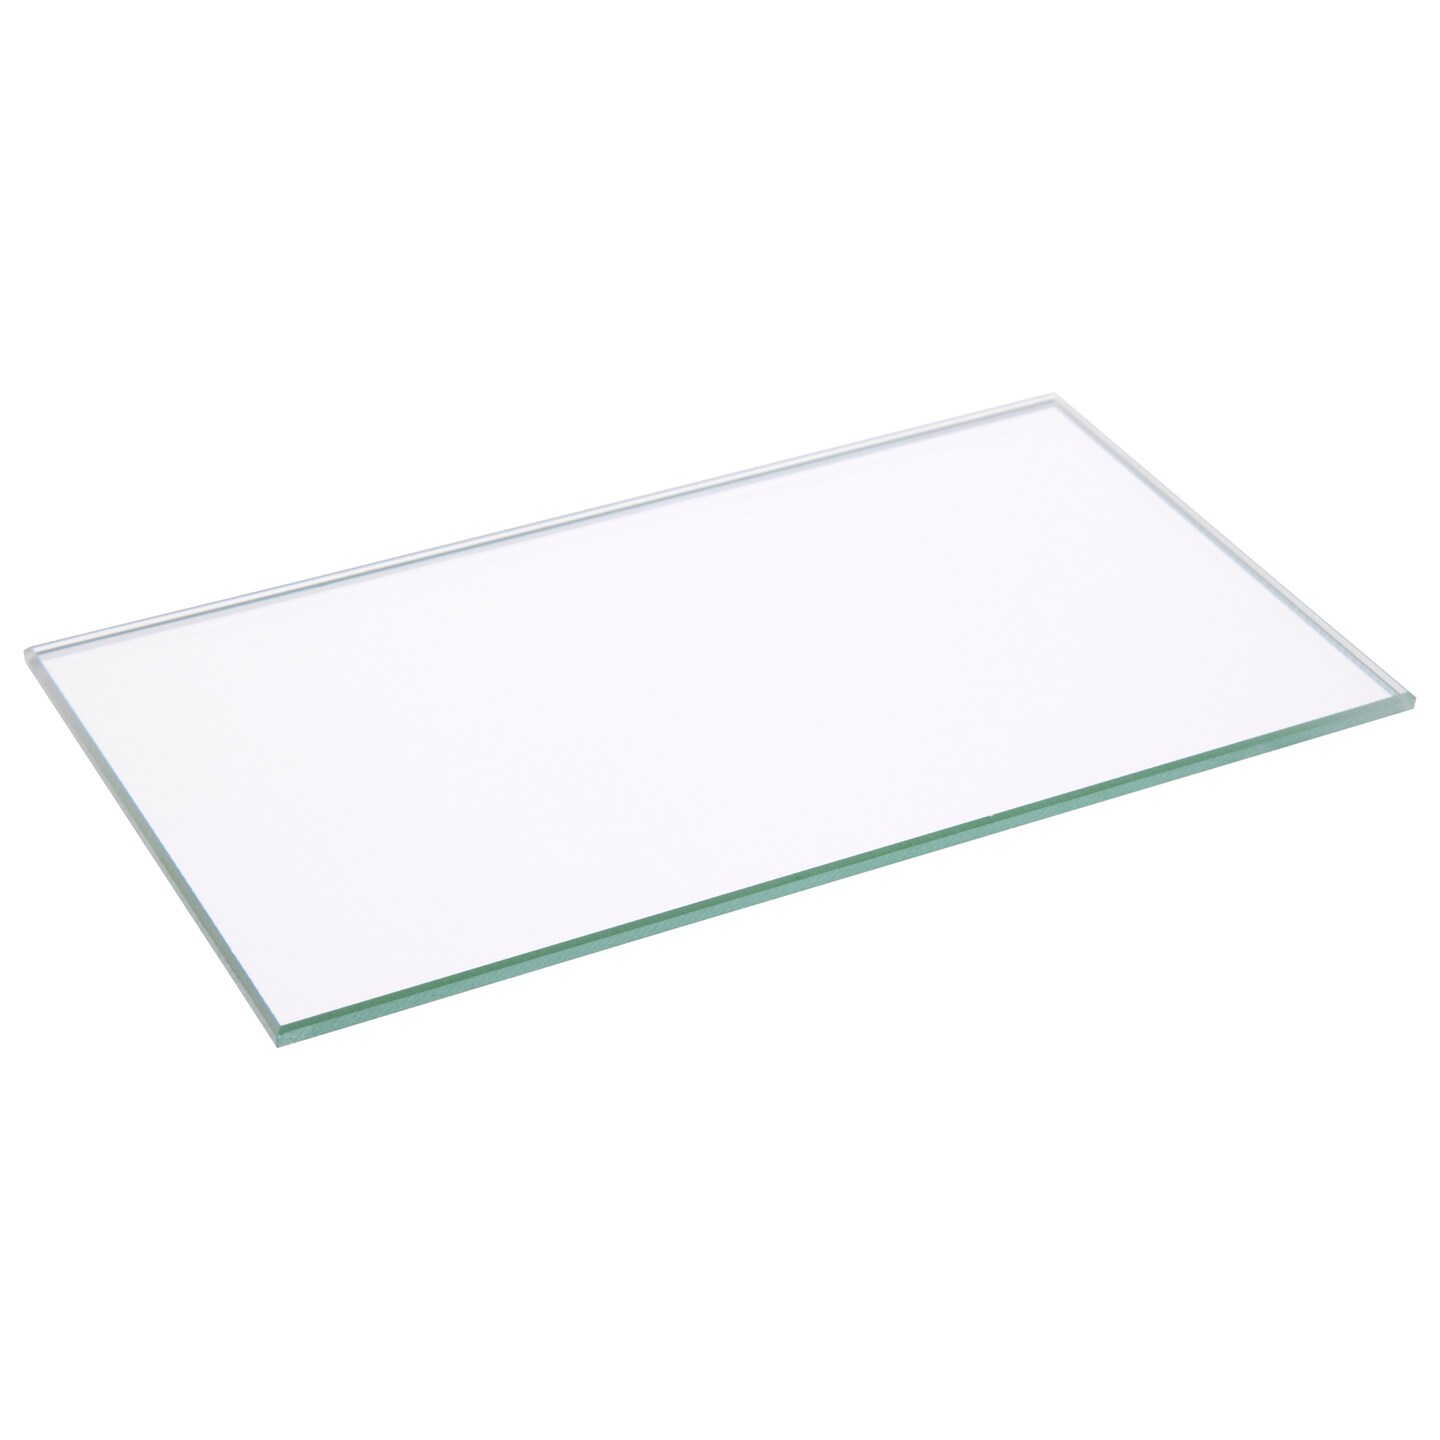 Plymor Rectangle 3mm Non-Beveled Glass Mirror, 3 inch x 5 inch